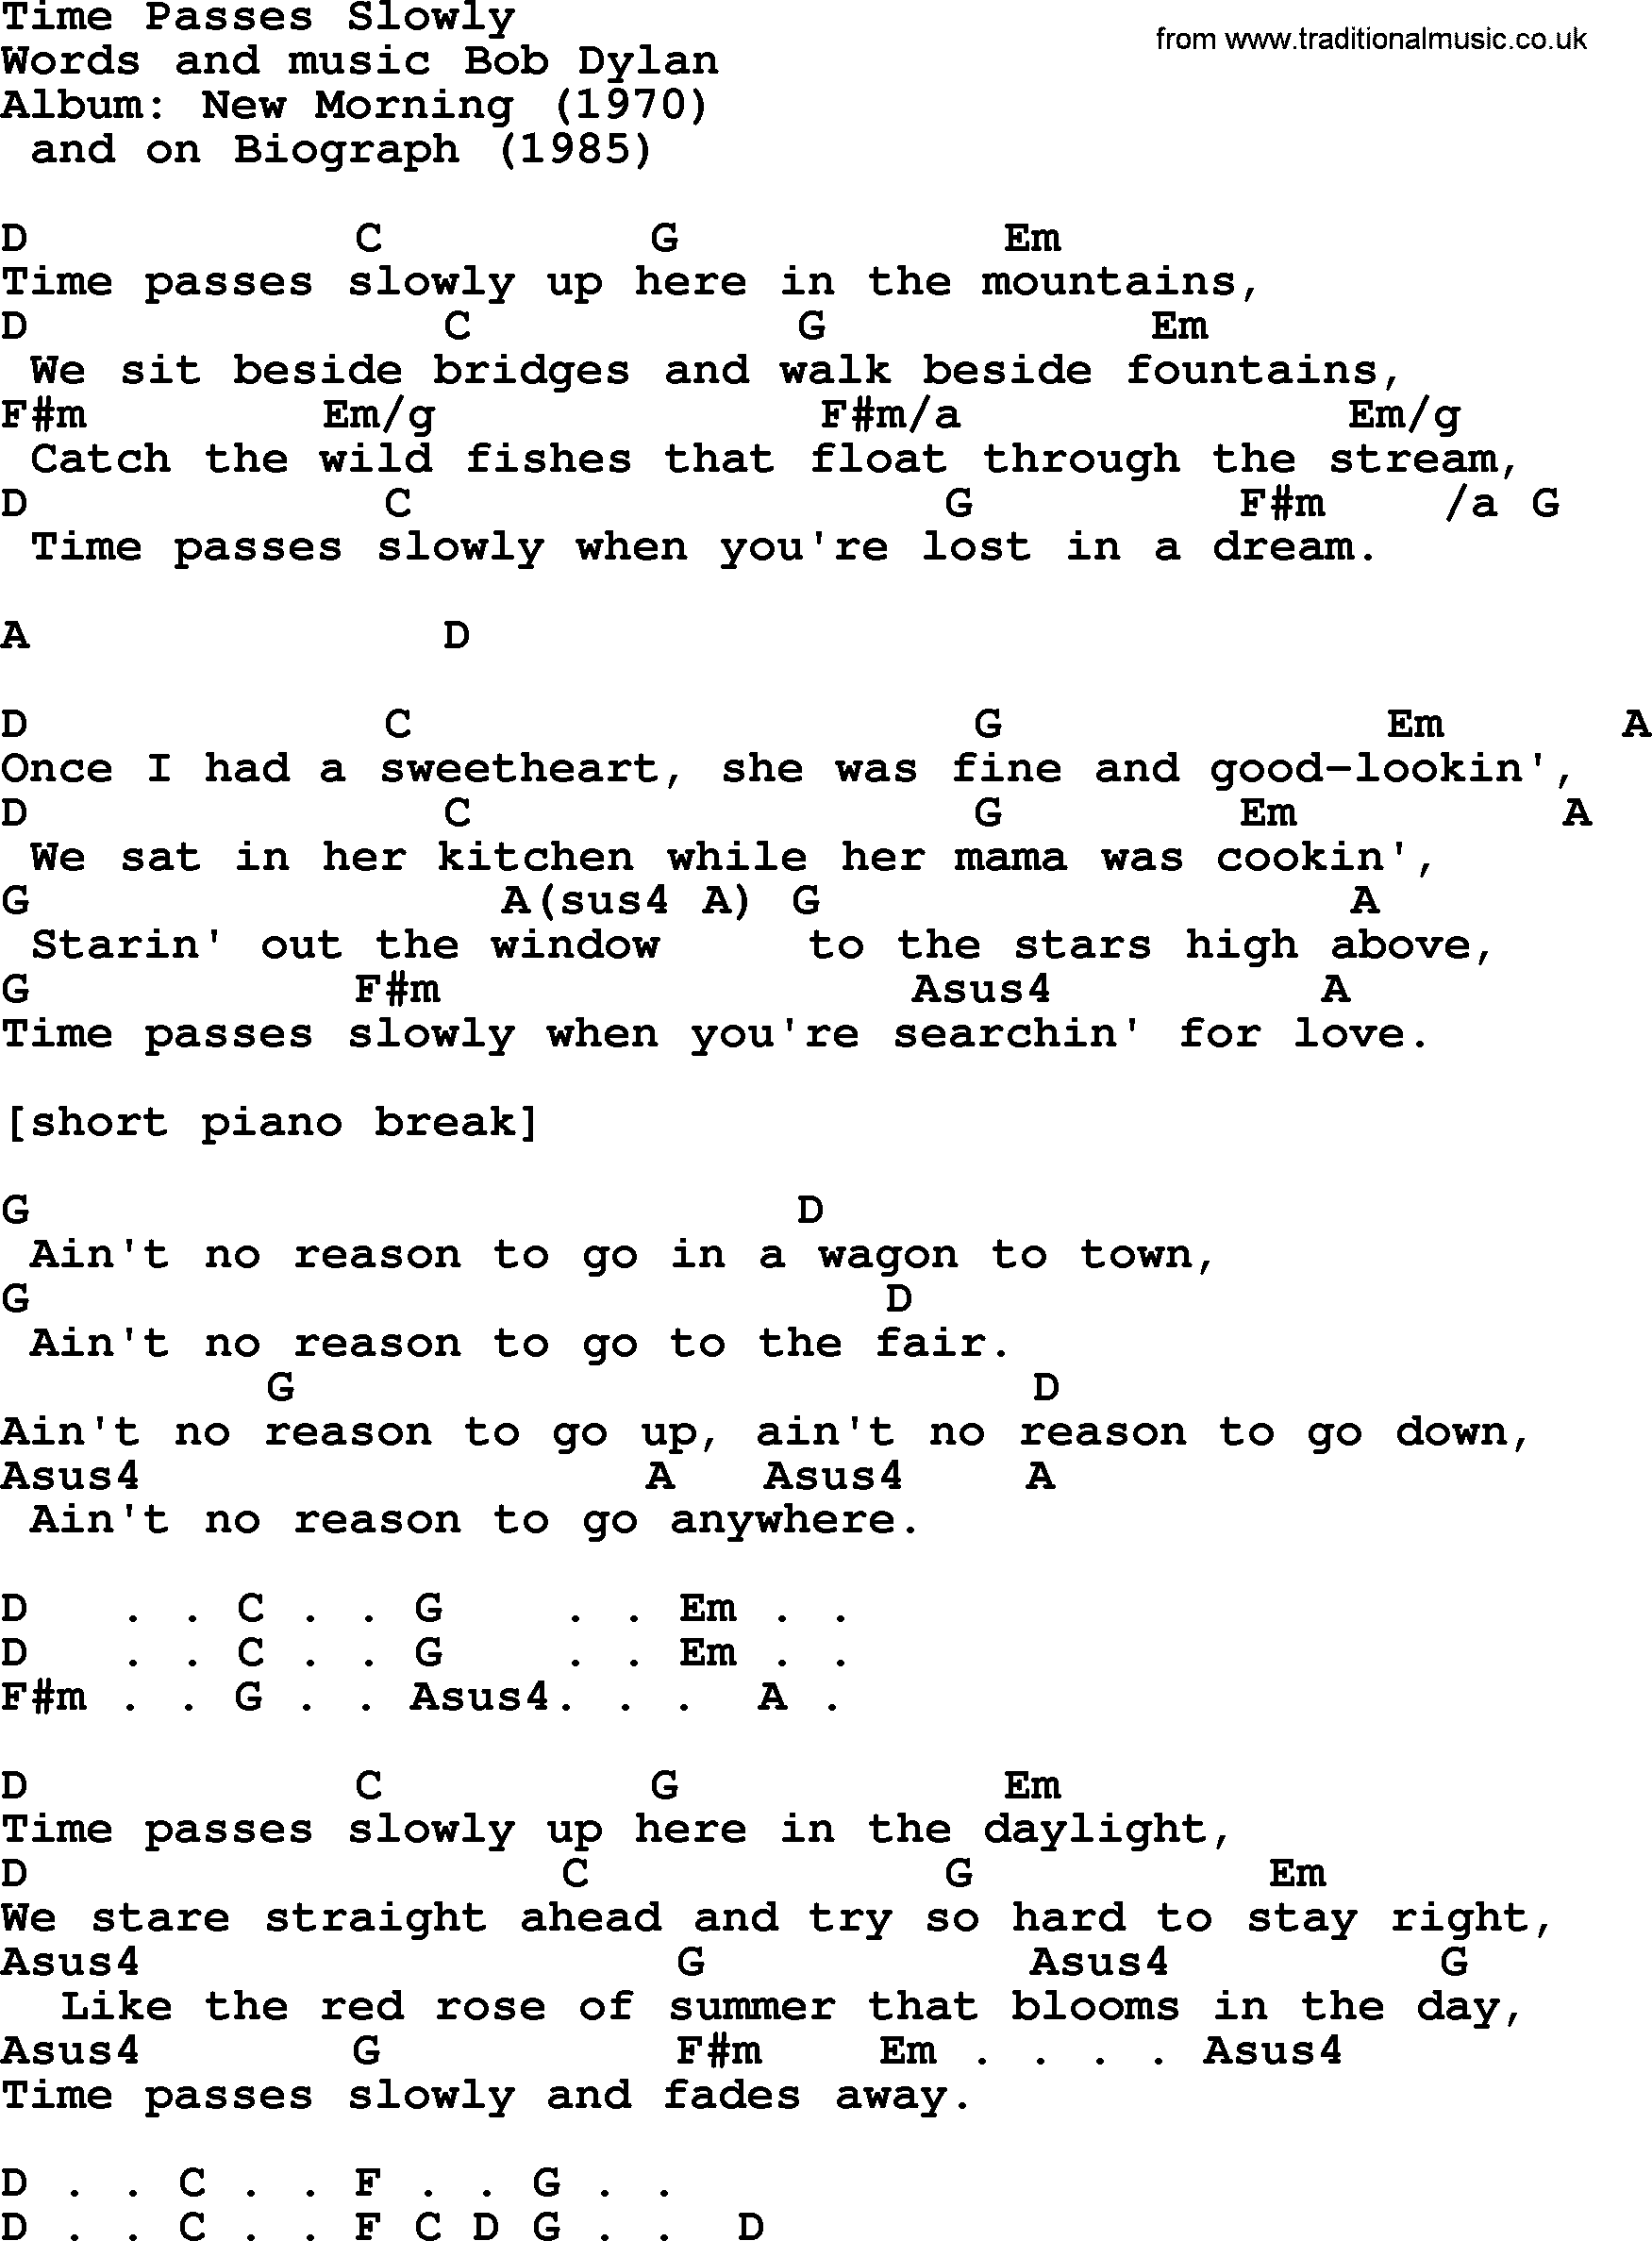 Bob Dylan song, lyrics with chords - Time Passes Slowly